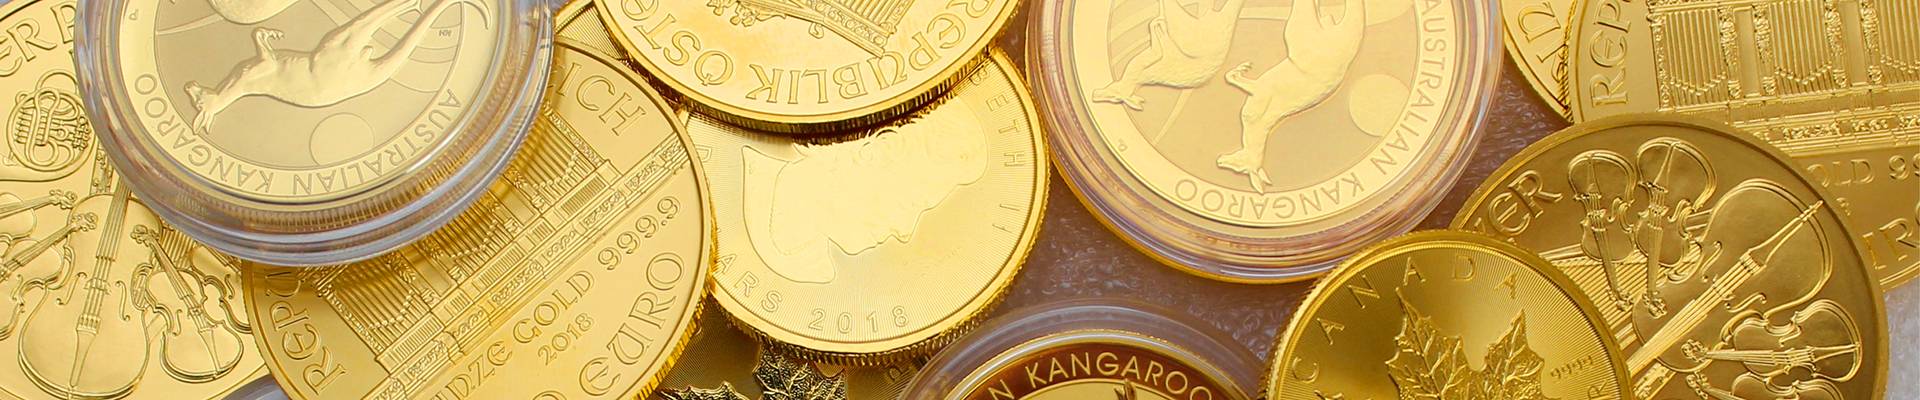 Widest selection of precious metals in New Zealand